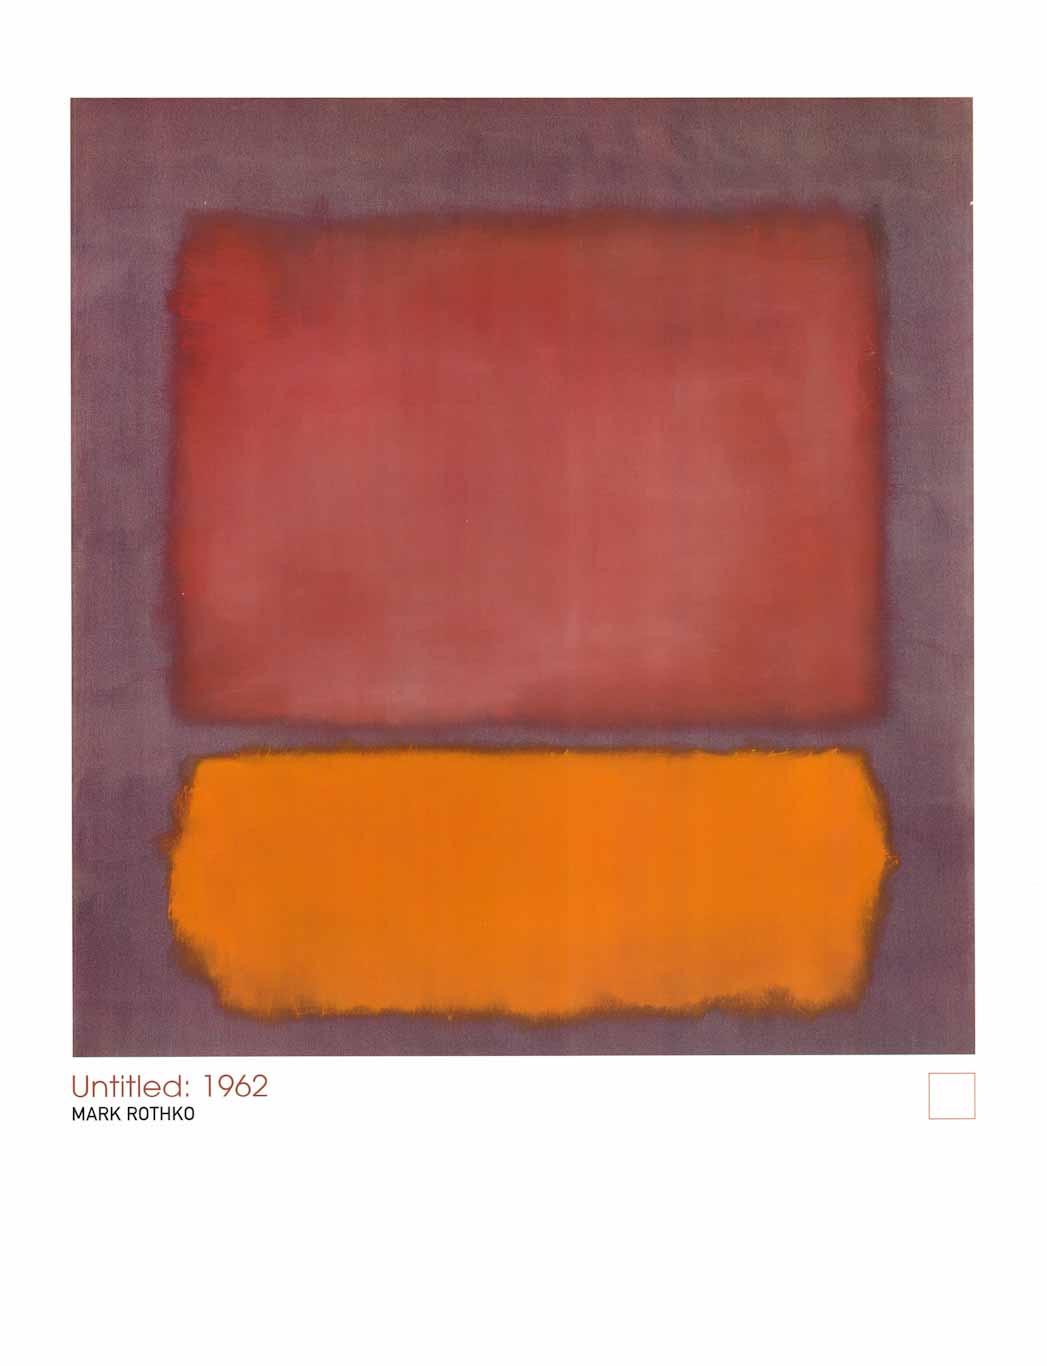 Untitled, 1962 by Mark Rothko - 24 X 32 Inches (Art Print)